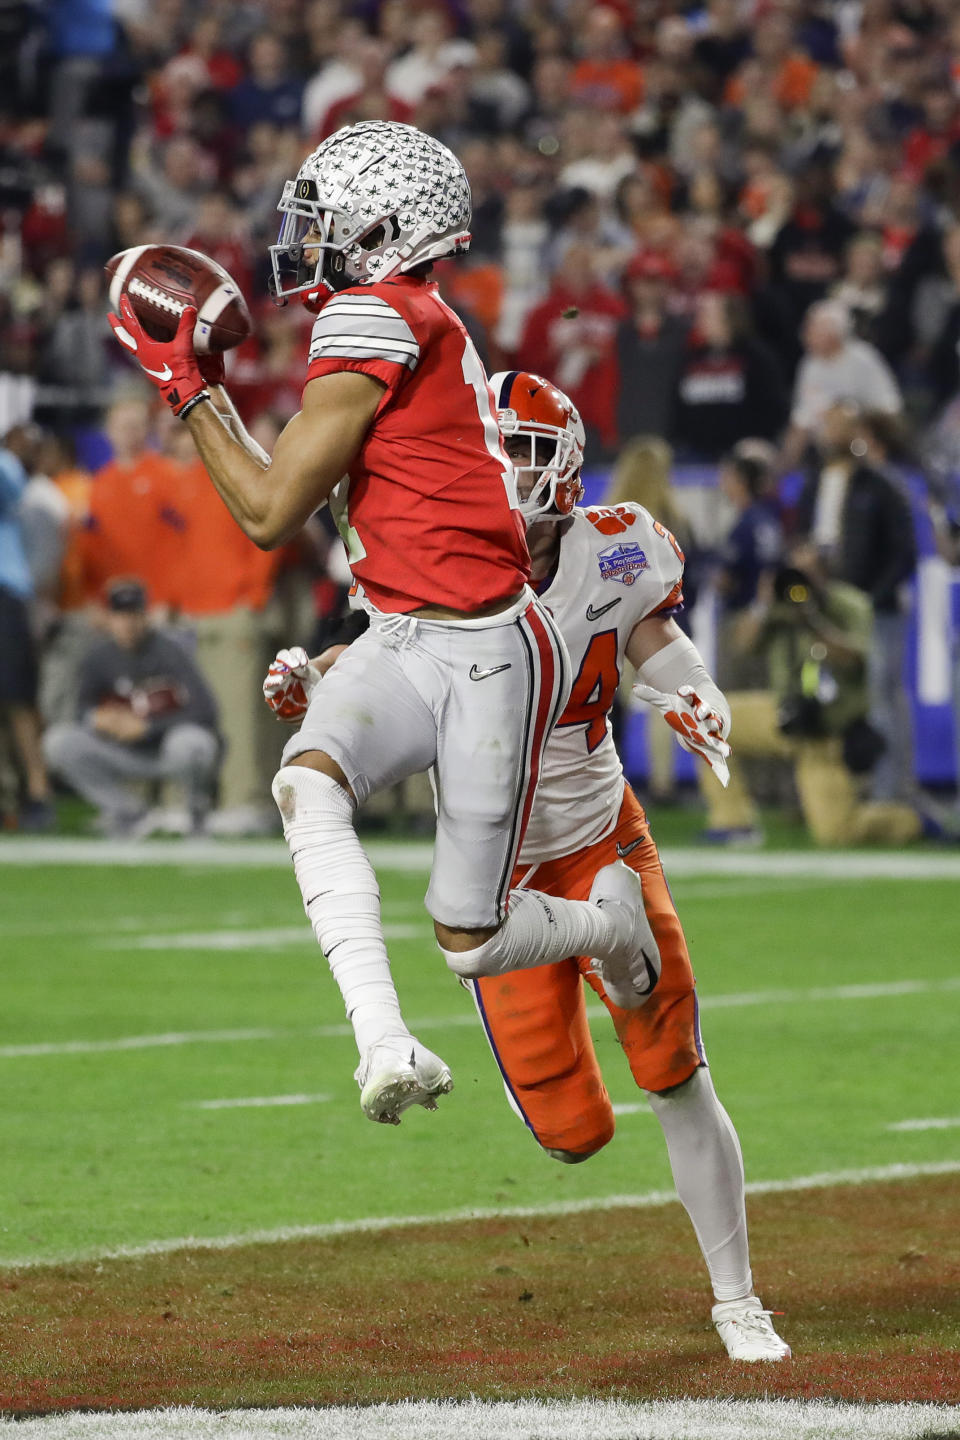 FILE - In this Saturday, Dec. 28, 2019, file photo, Ohio State wide receiver Chris Olave catches a touchdown pass in front of Clemson safety Nolan Turner during the second half of the Fiesta Bowl NCAA college football game in Glendale, Ariz. Ohio State hosts Nebraska on Saturday, Oct. 24, 2020. (AP Photo/Rick Scuteri, File)